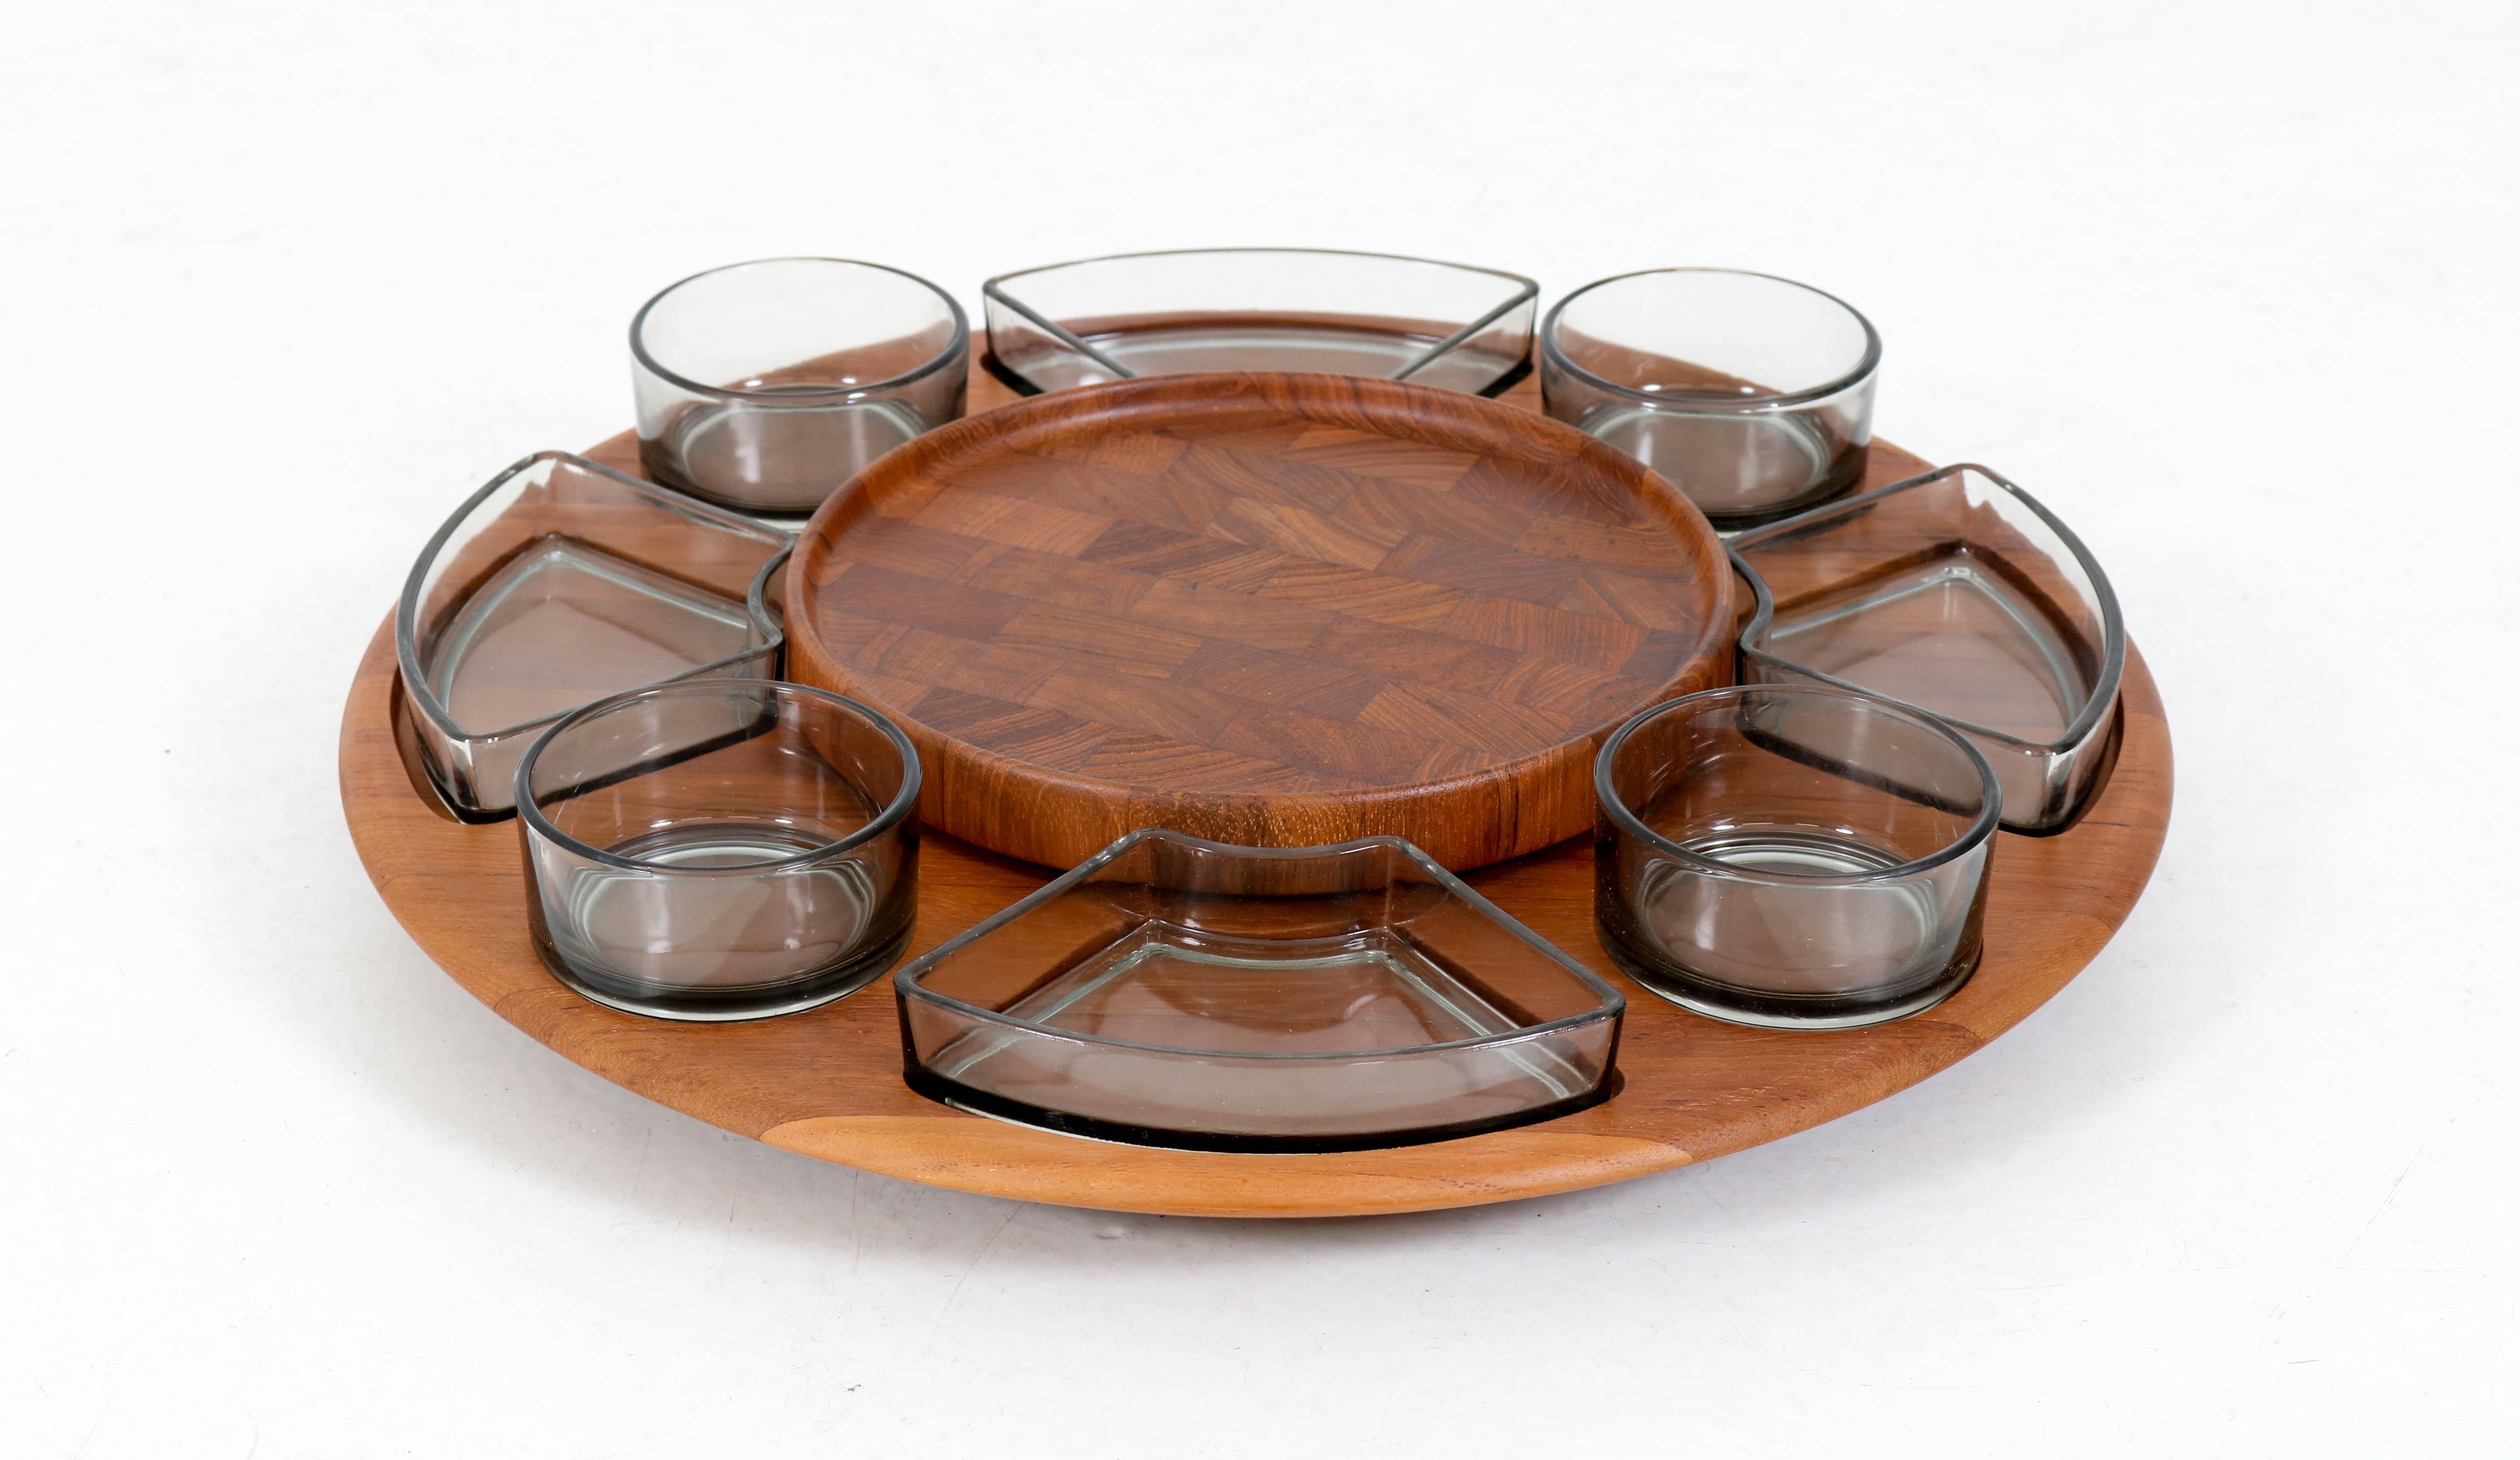 Offered by Amsterdam Modernism:
Elegant Mid-Century Modern table-carousel by Digsmed.
Striking Danish design from the 1950s.
Seven original glass bowls for different snacks.
Comes with original cardboard box, the cardboard is not in good